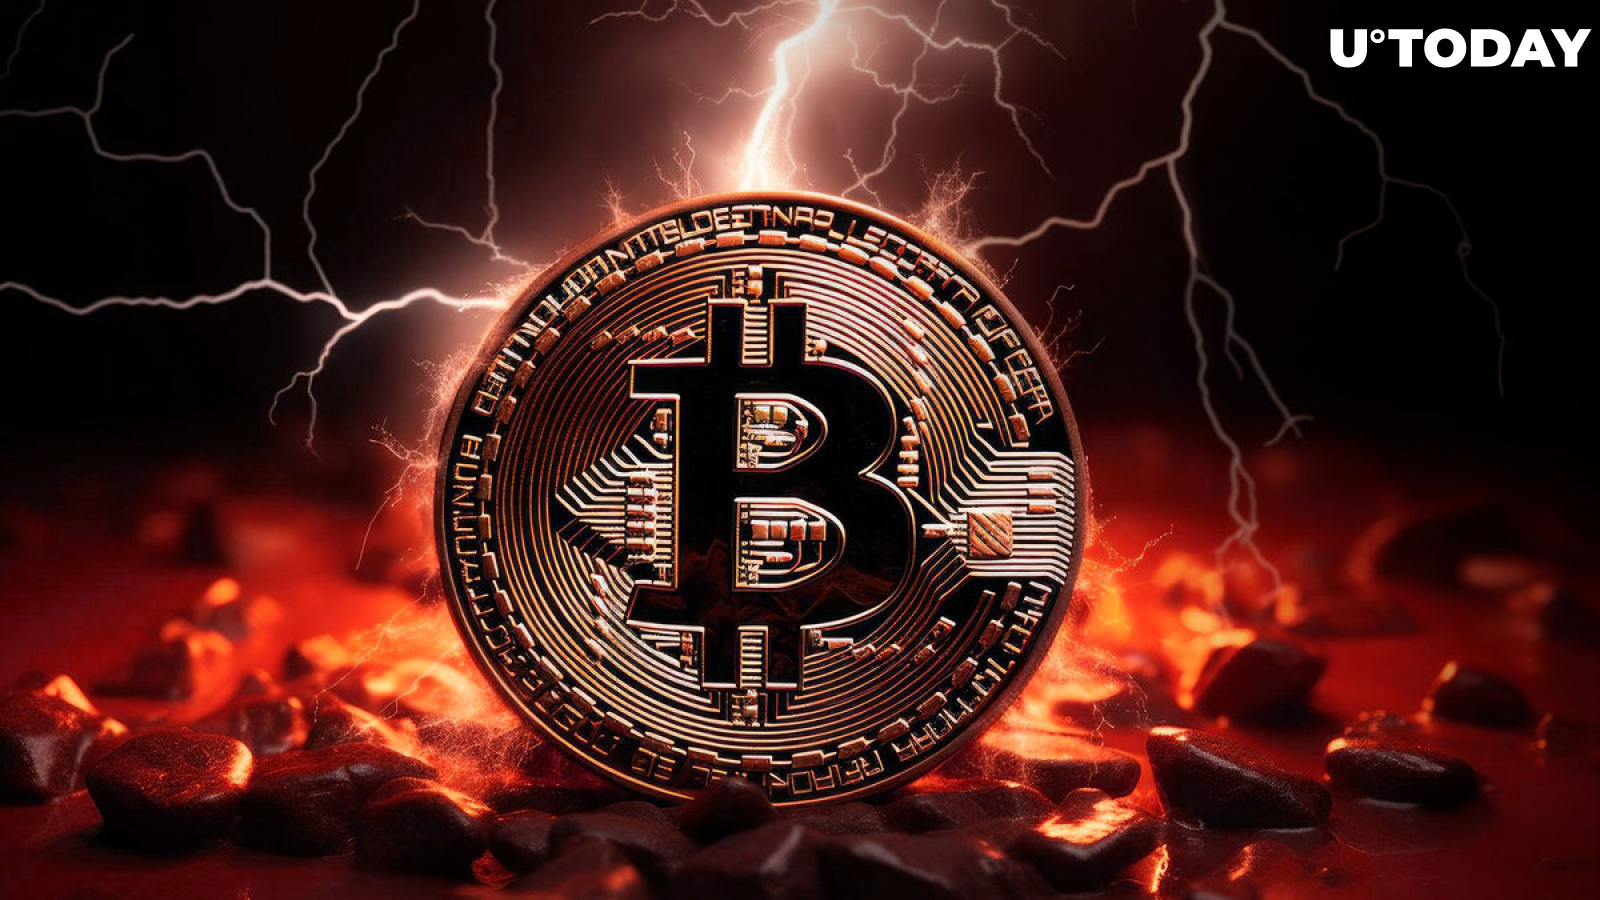 Bitcoin's Lightning Network Faces Storm as Developer Exits Over Security Concerns